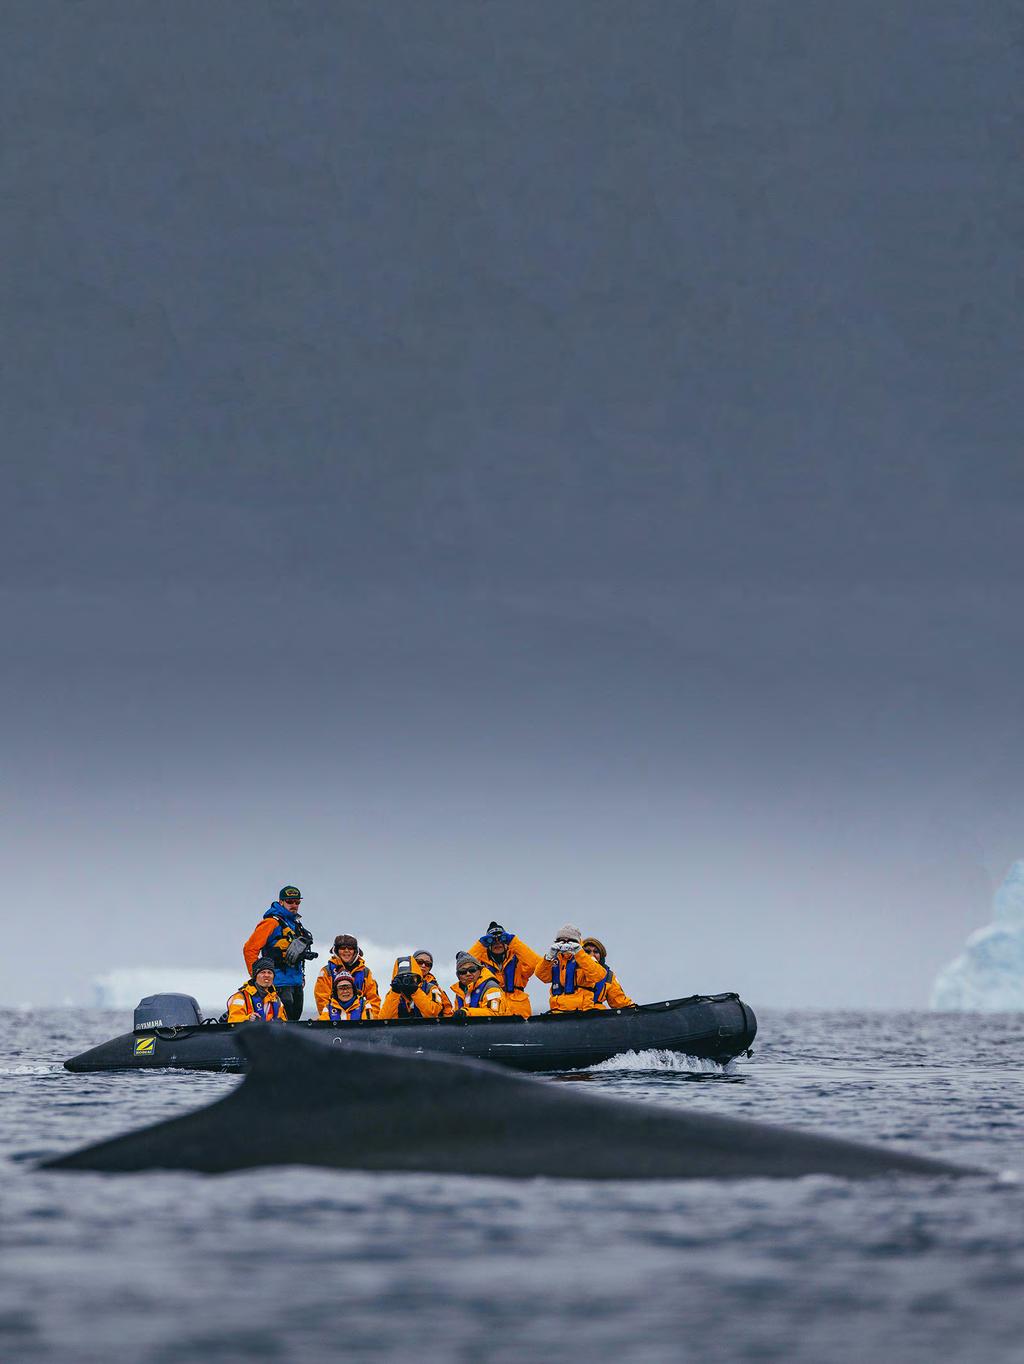 TO BOOK YOUR NEXT ADVENTURE Contact your Travel Professional or a Quark Expeditions Polar Travel Adviser 1.888.892.